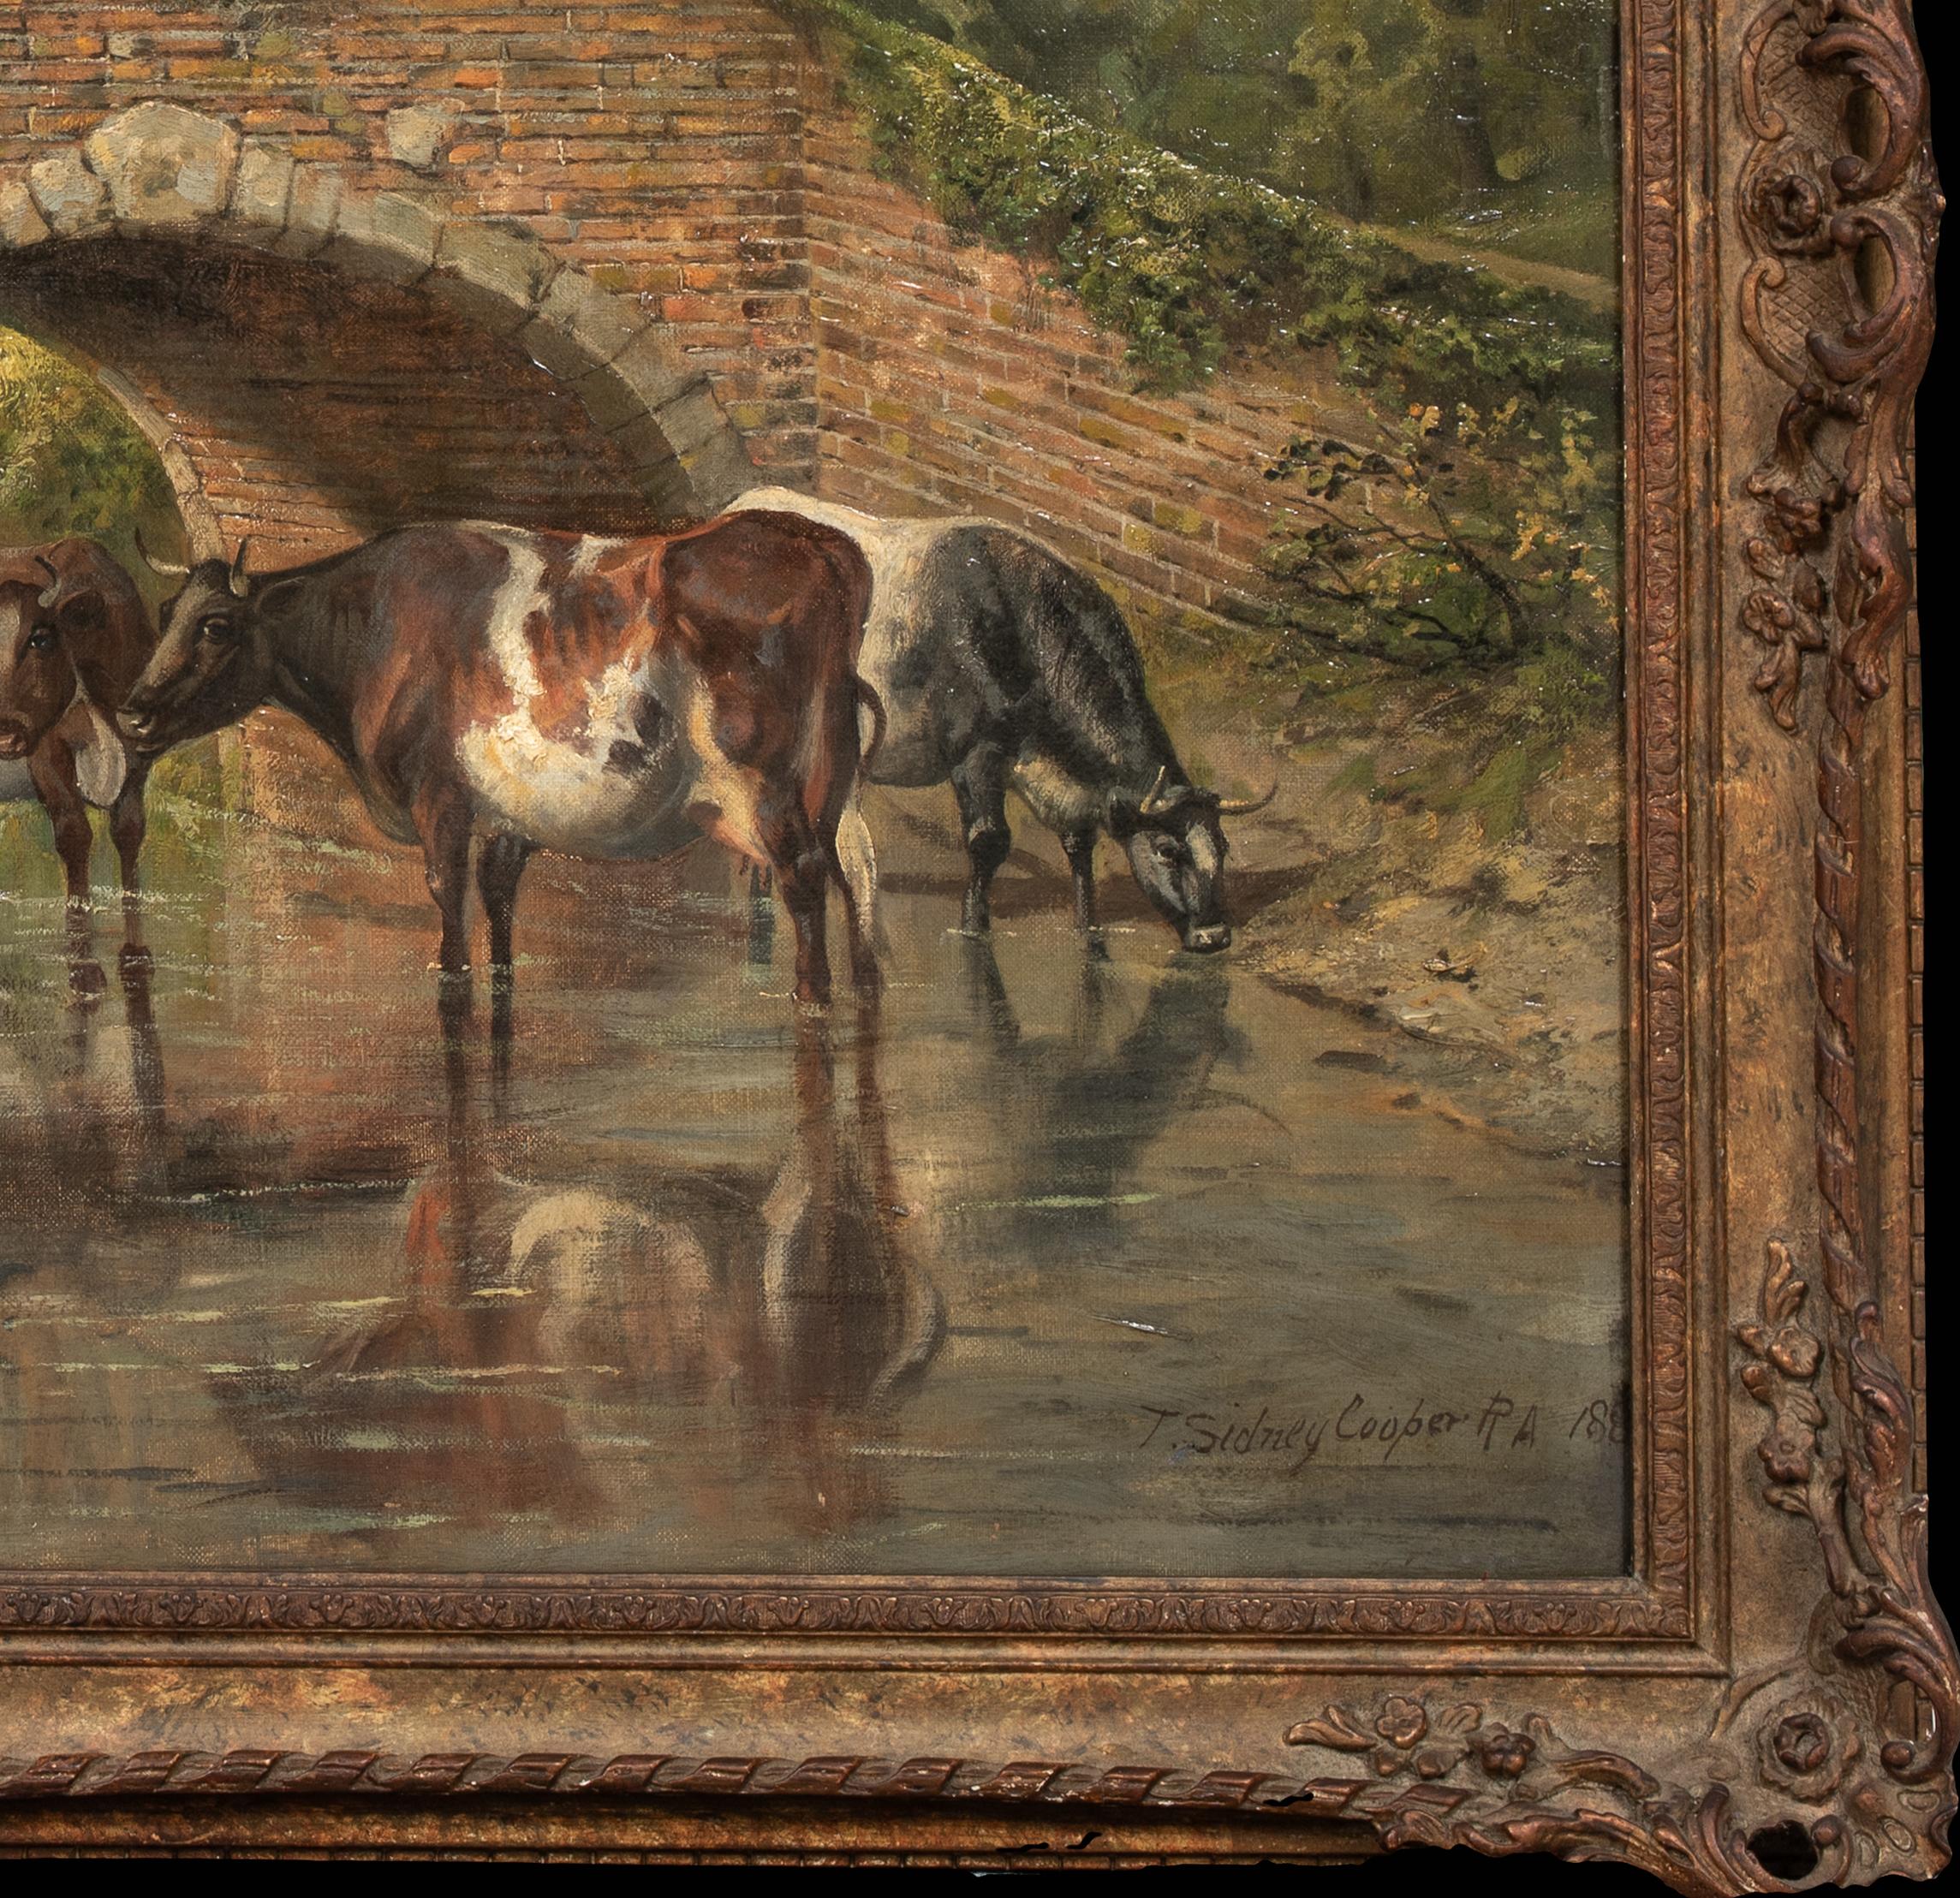 Cattle Watering At The Stream, 19th Century 

by THOMAS SIDNEY COOPER (1803-1902) 

Large 19th Century English landscape with cattle watering by a stream with a bridge beyond, oil on canvas by Thomas Sidney Cooper. Excellent quality and condition